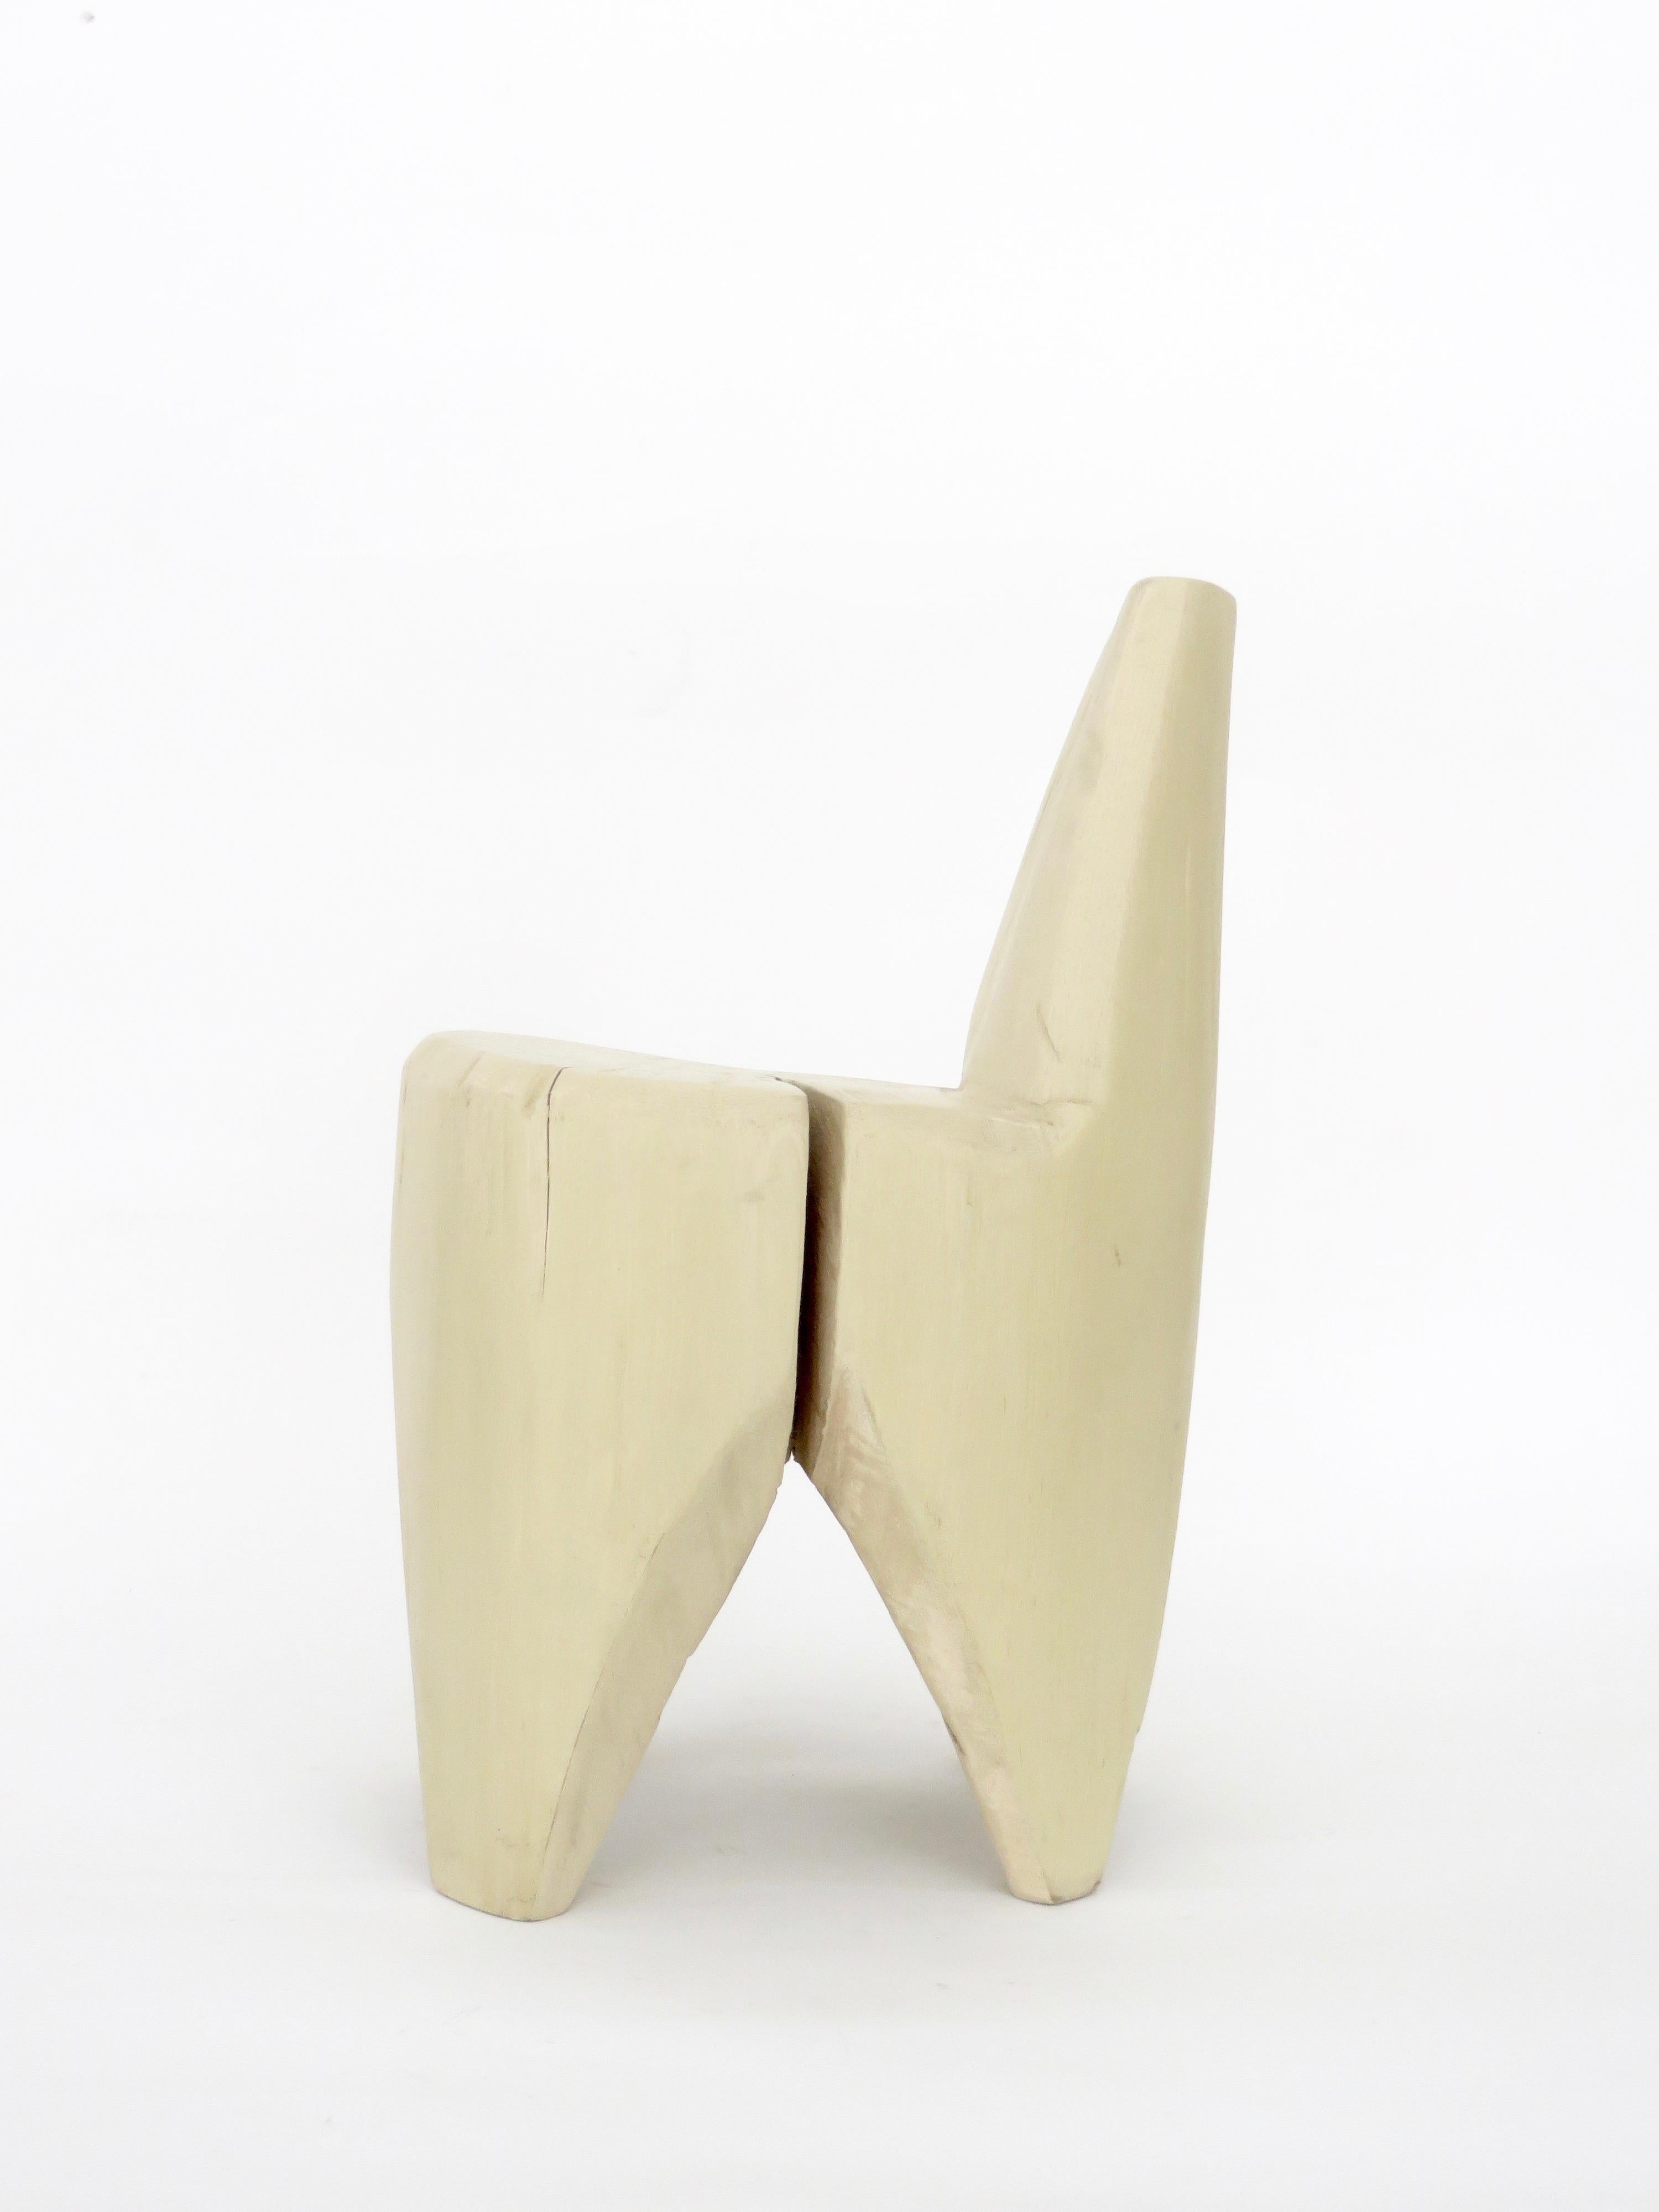 Wood Hannah Vaughan Contemporary Carved Sculptural Chair, 2019